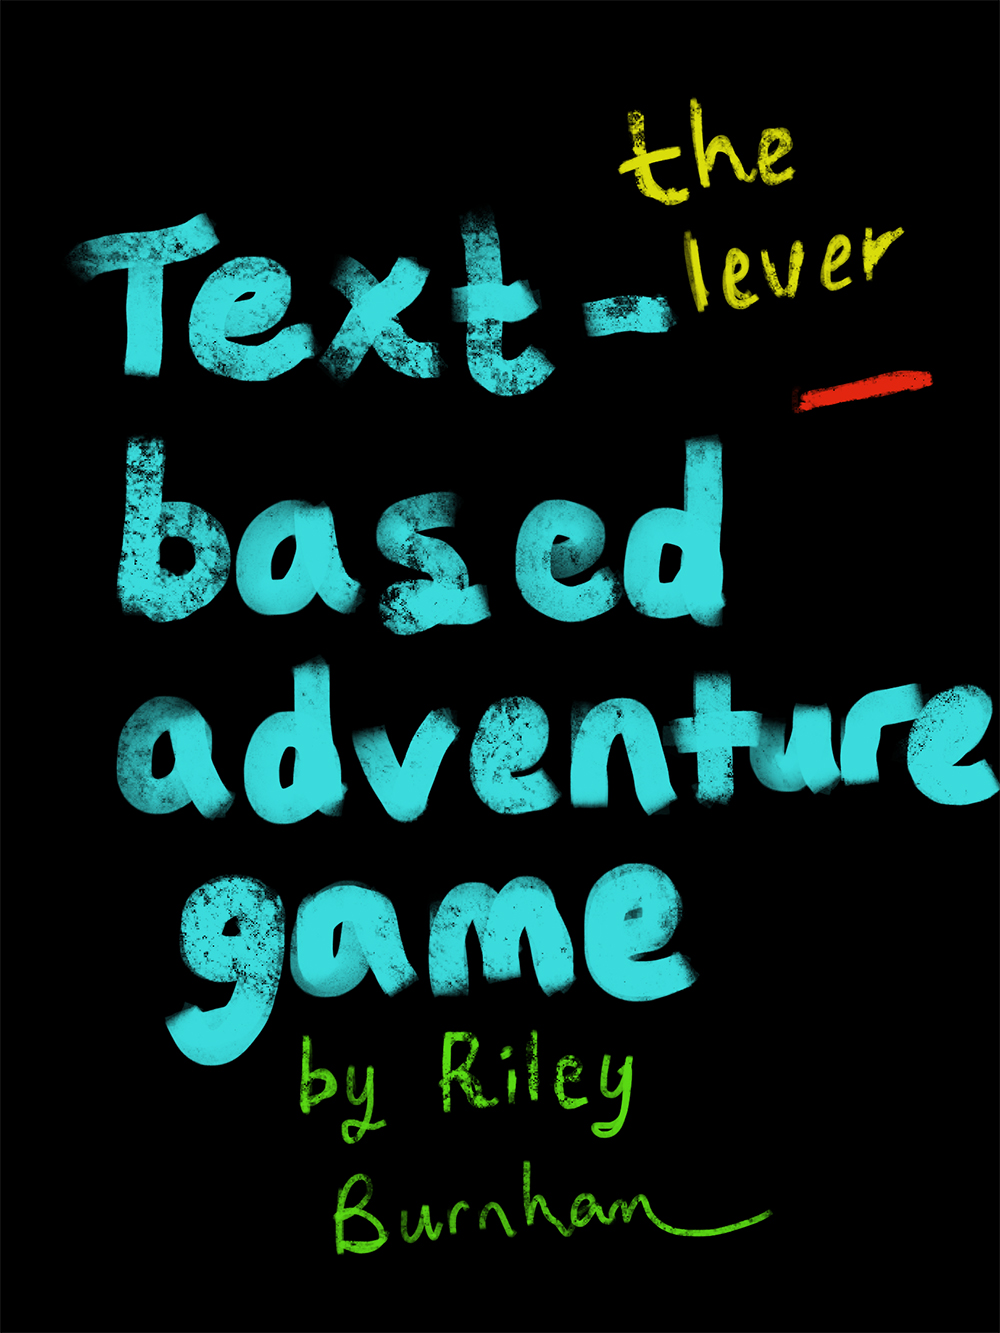 text-based adventure game